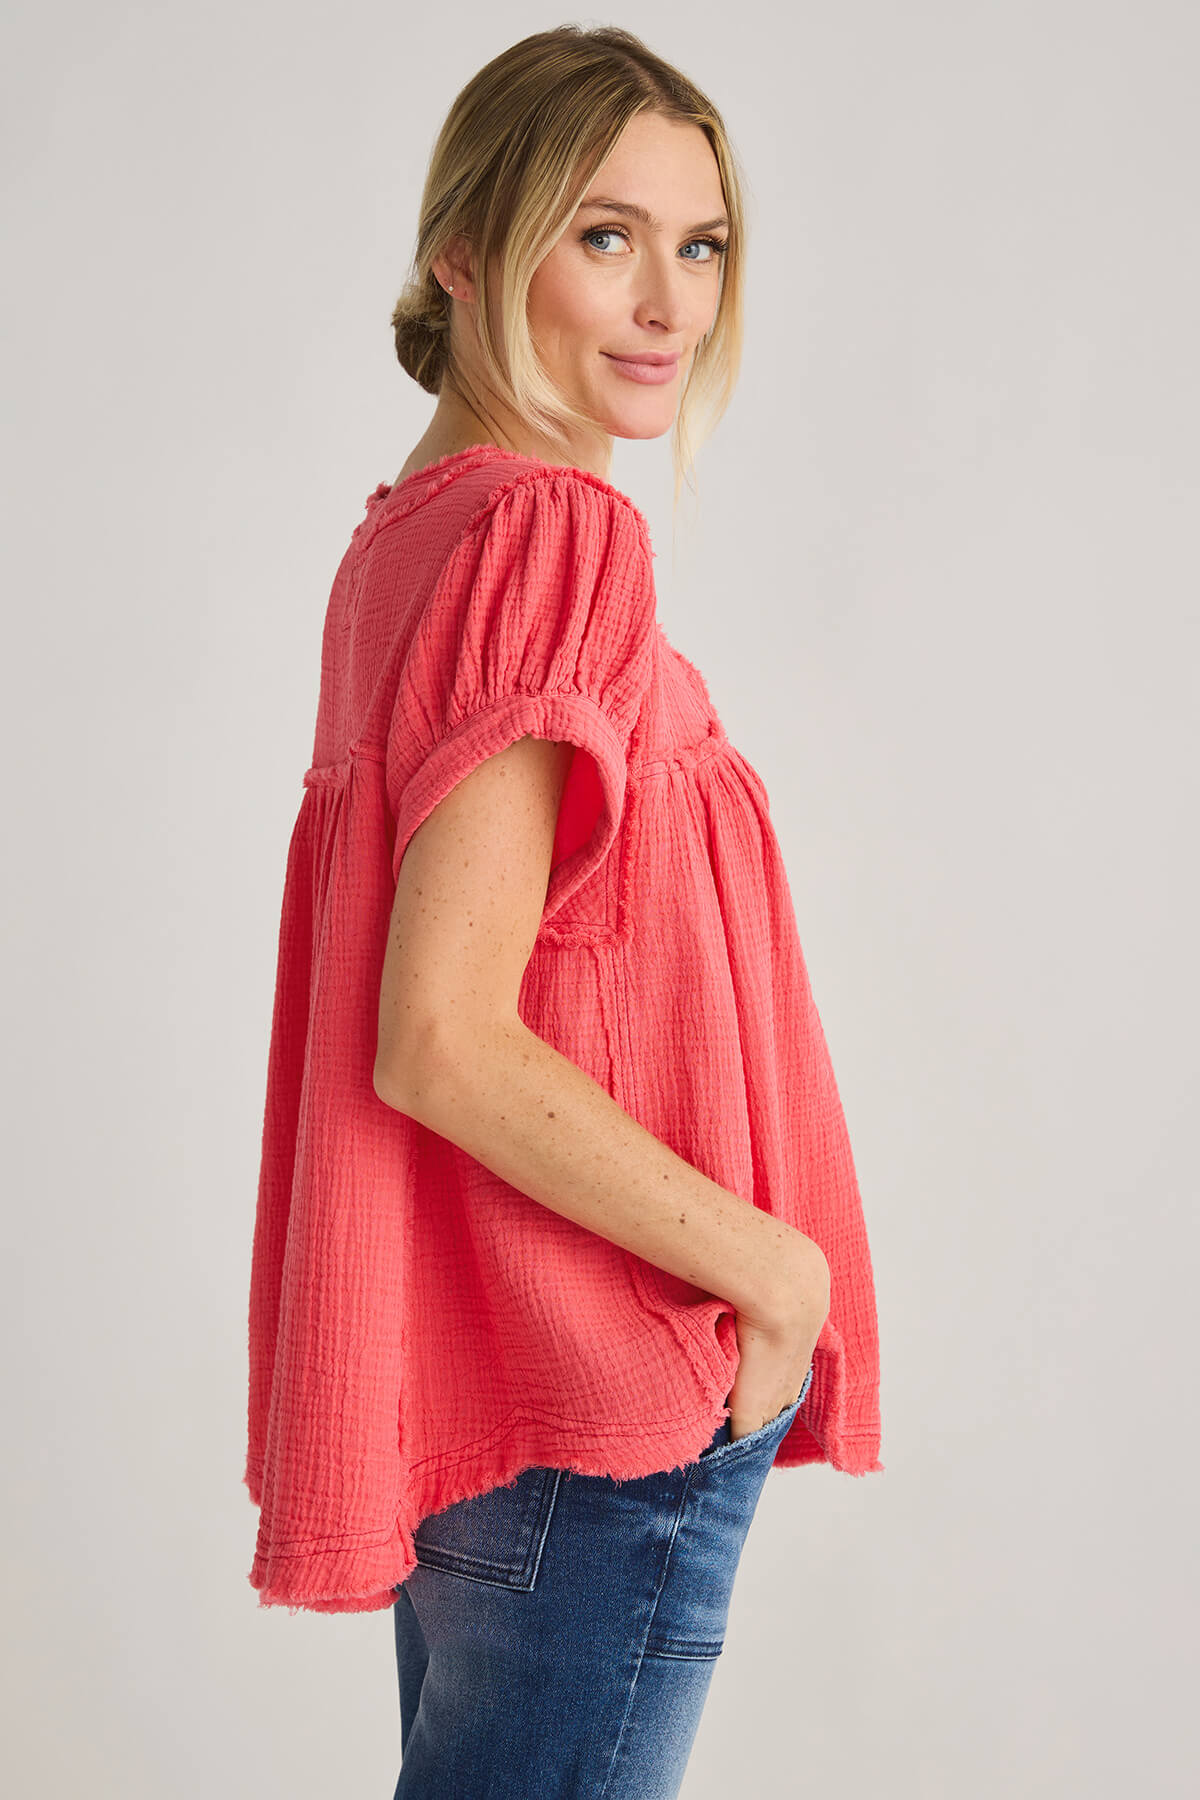 Free People Horizons Double Cloth Top